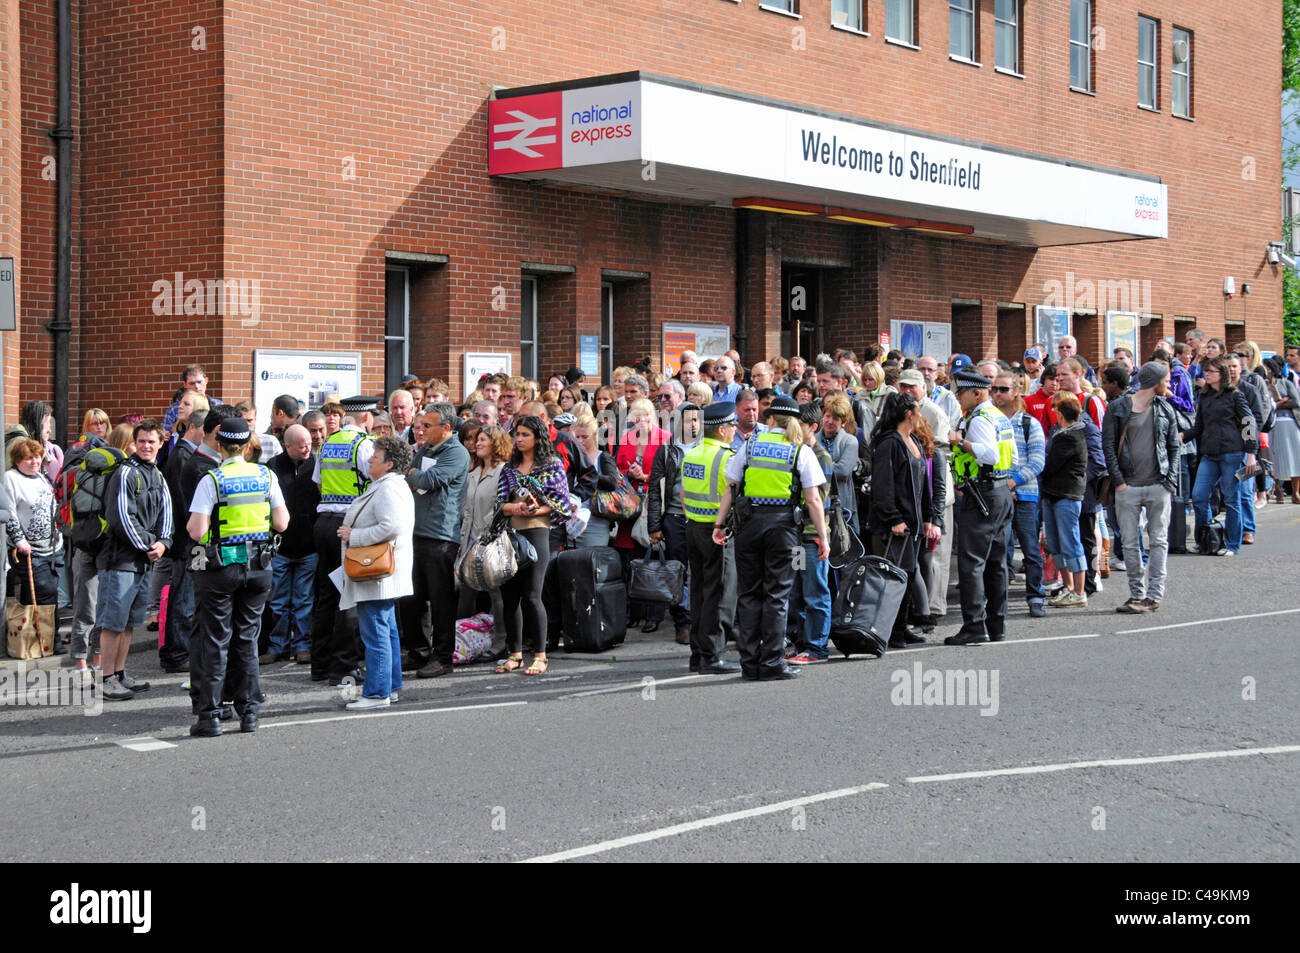 British Transport Police controlling crowd of people outside railway station waiting for buses train cancellations & signal failure Essex England uk Stock Photo